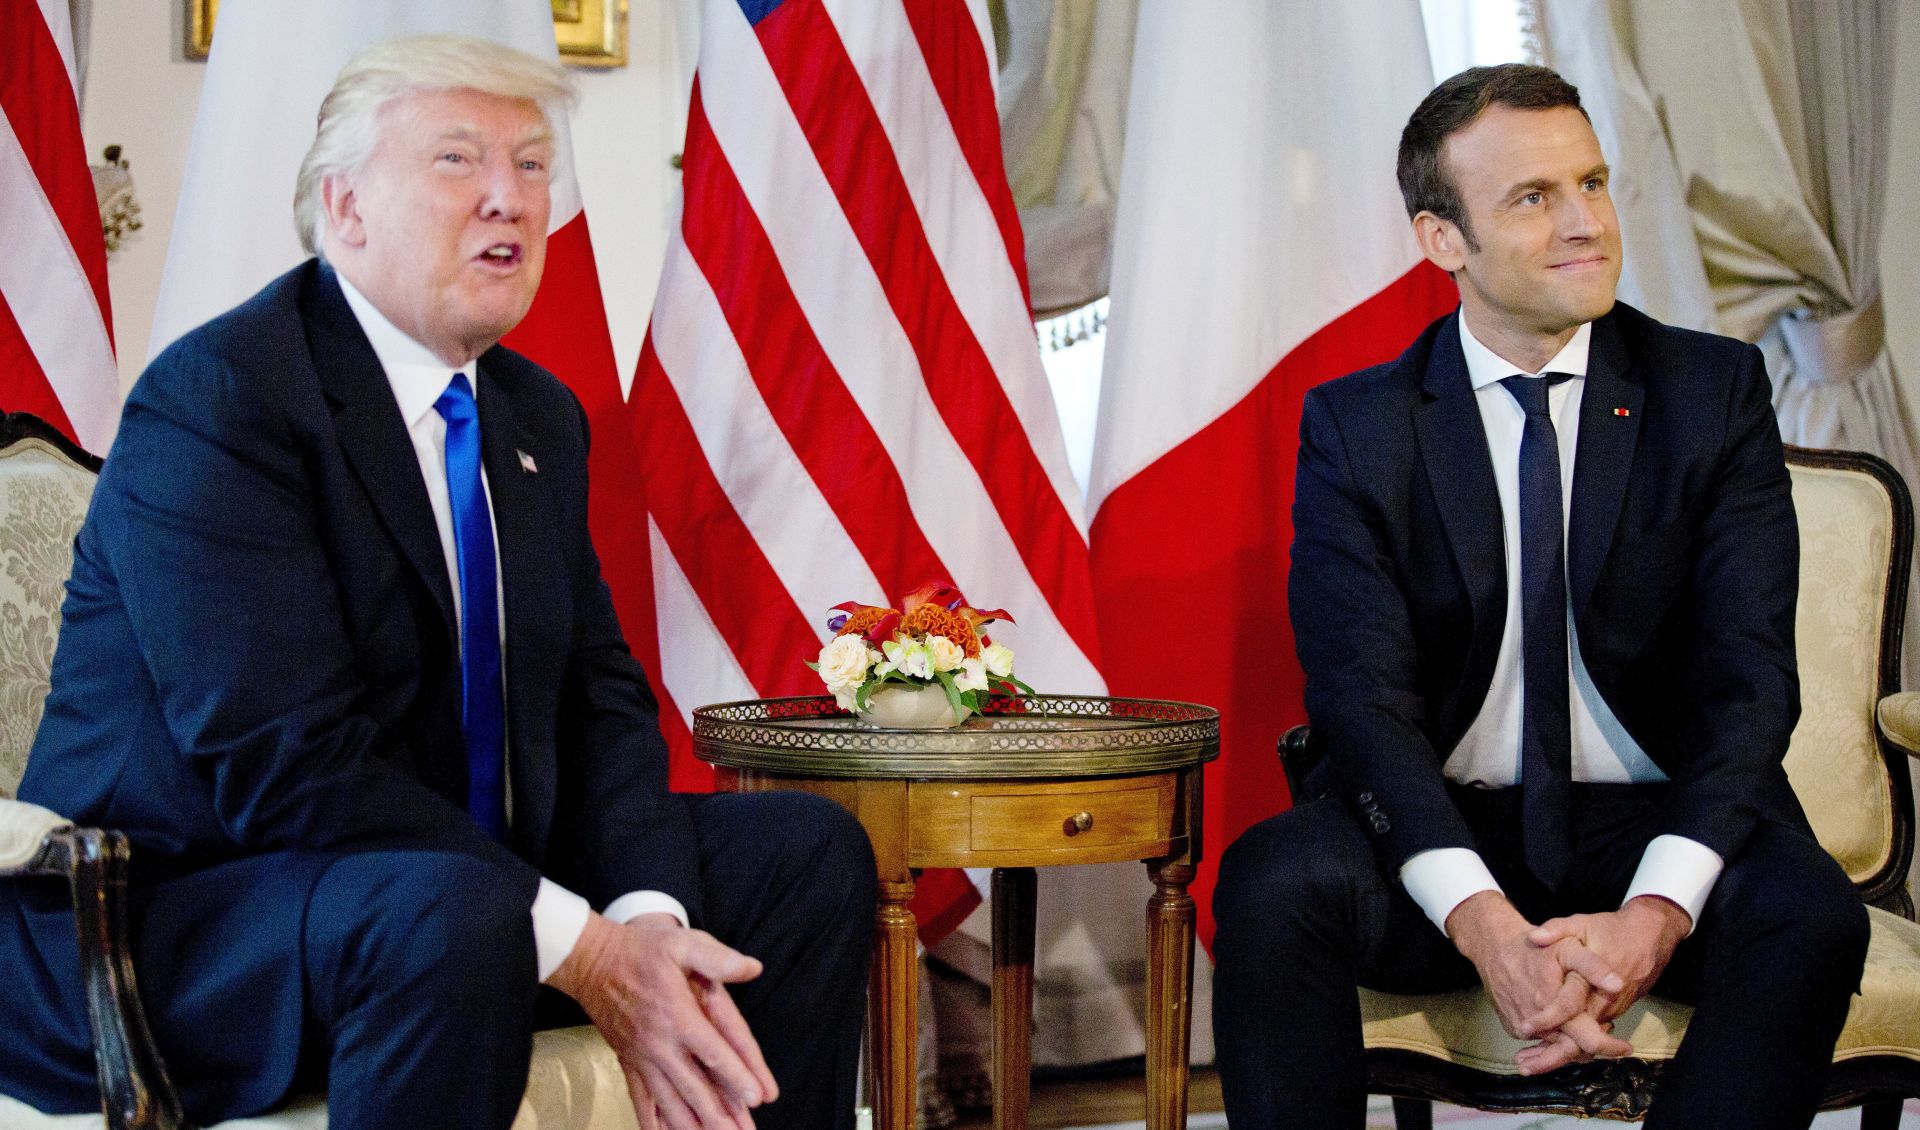 epa05989016 US President Donald J. Trump meets with French President Emmanuel Macron (R) during a meeting on the sidelines of the NATO summit, at the US ambassador's residence in Brussels, Belgium, 25 May 2017. Trump is in Belgium to attend a North Atlantic Treaty Organization (NATO) Summit.  EPA/PETER DEJONG/POOL MAXPPP OUT